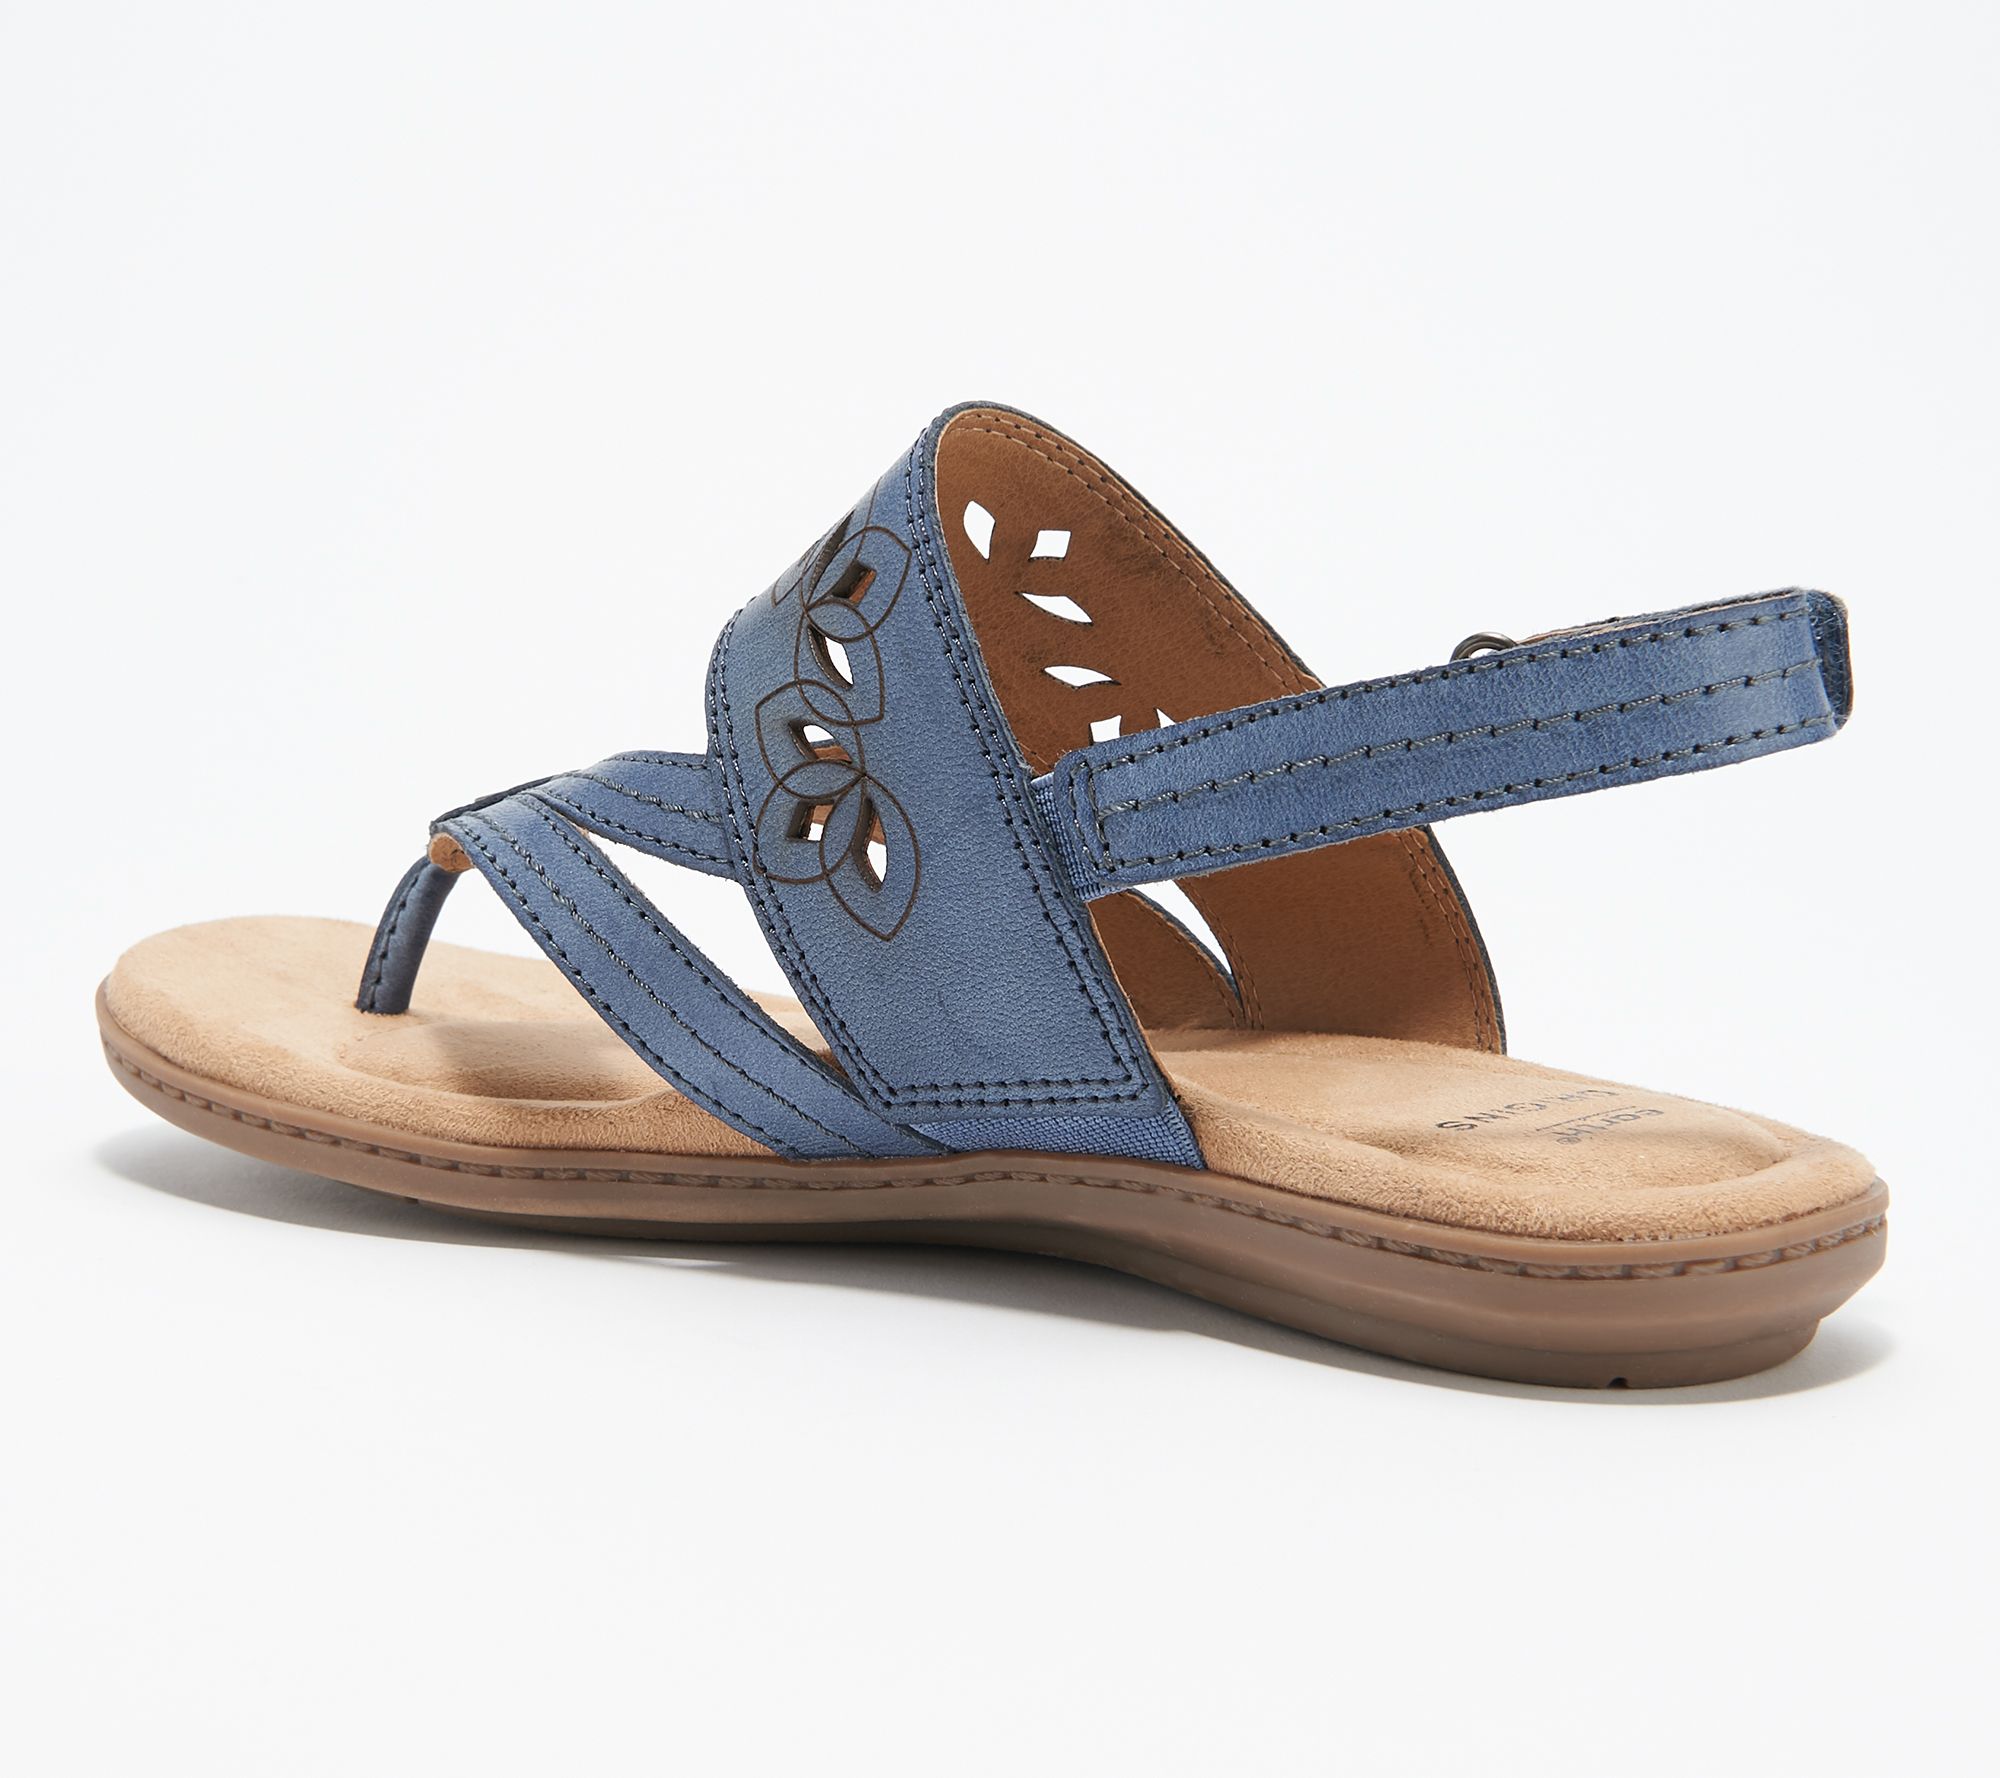 Earth Origins Leather Thongs Sandals - Belle Becky - QVC.com